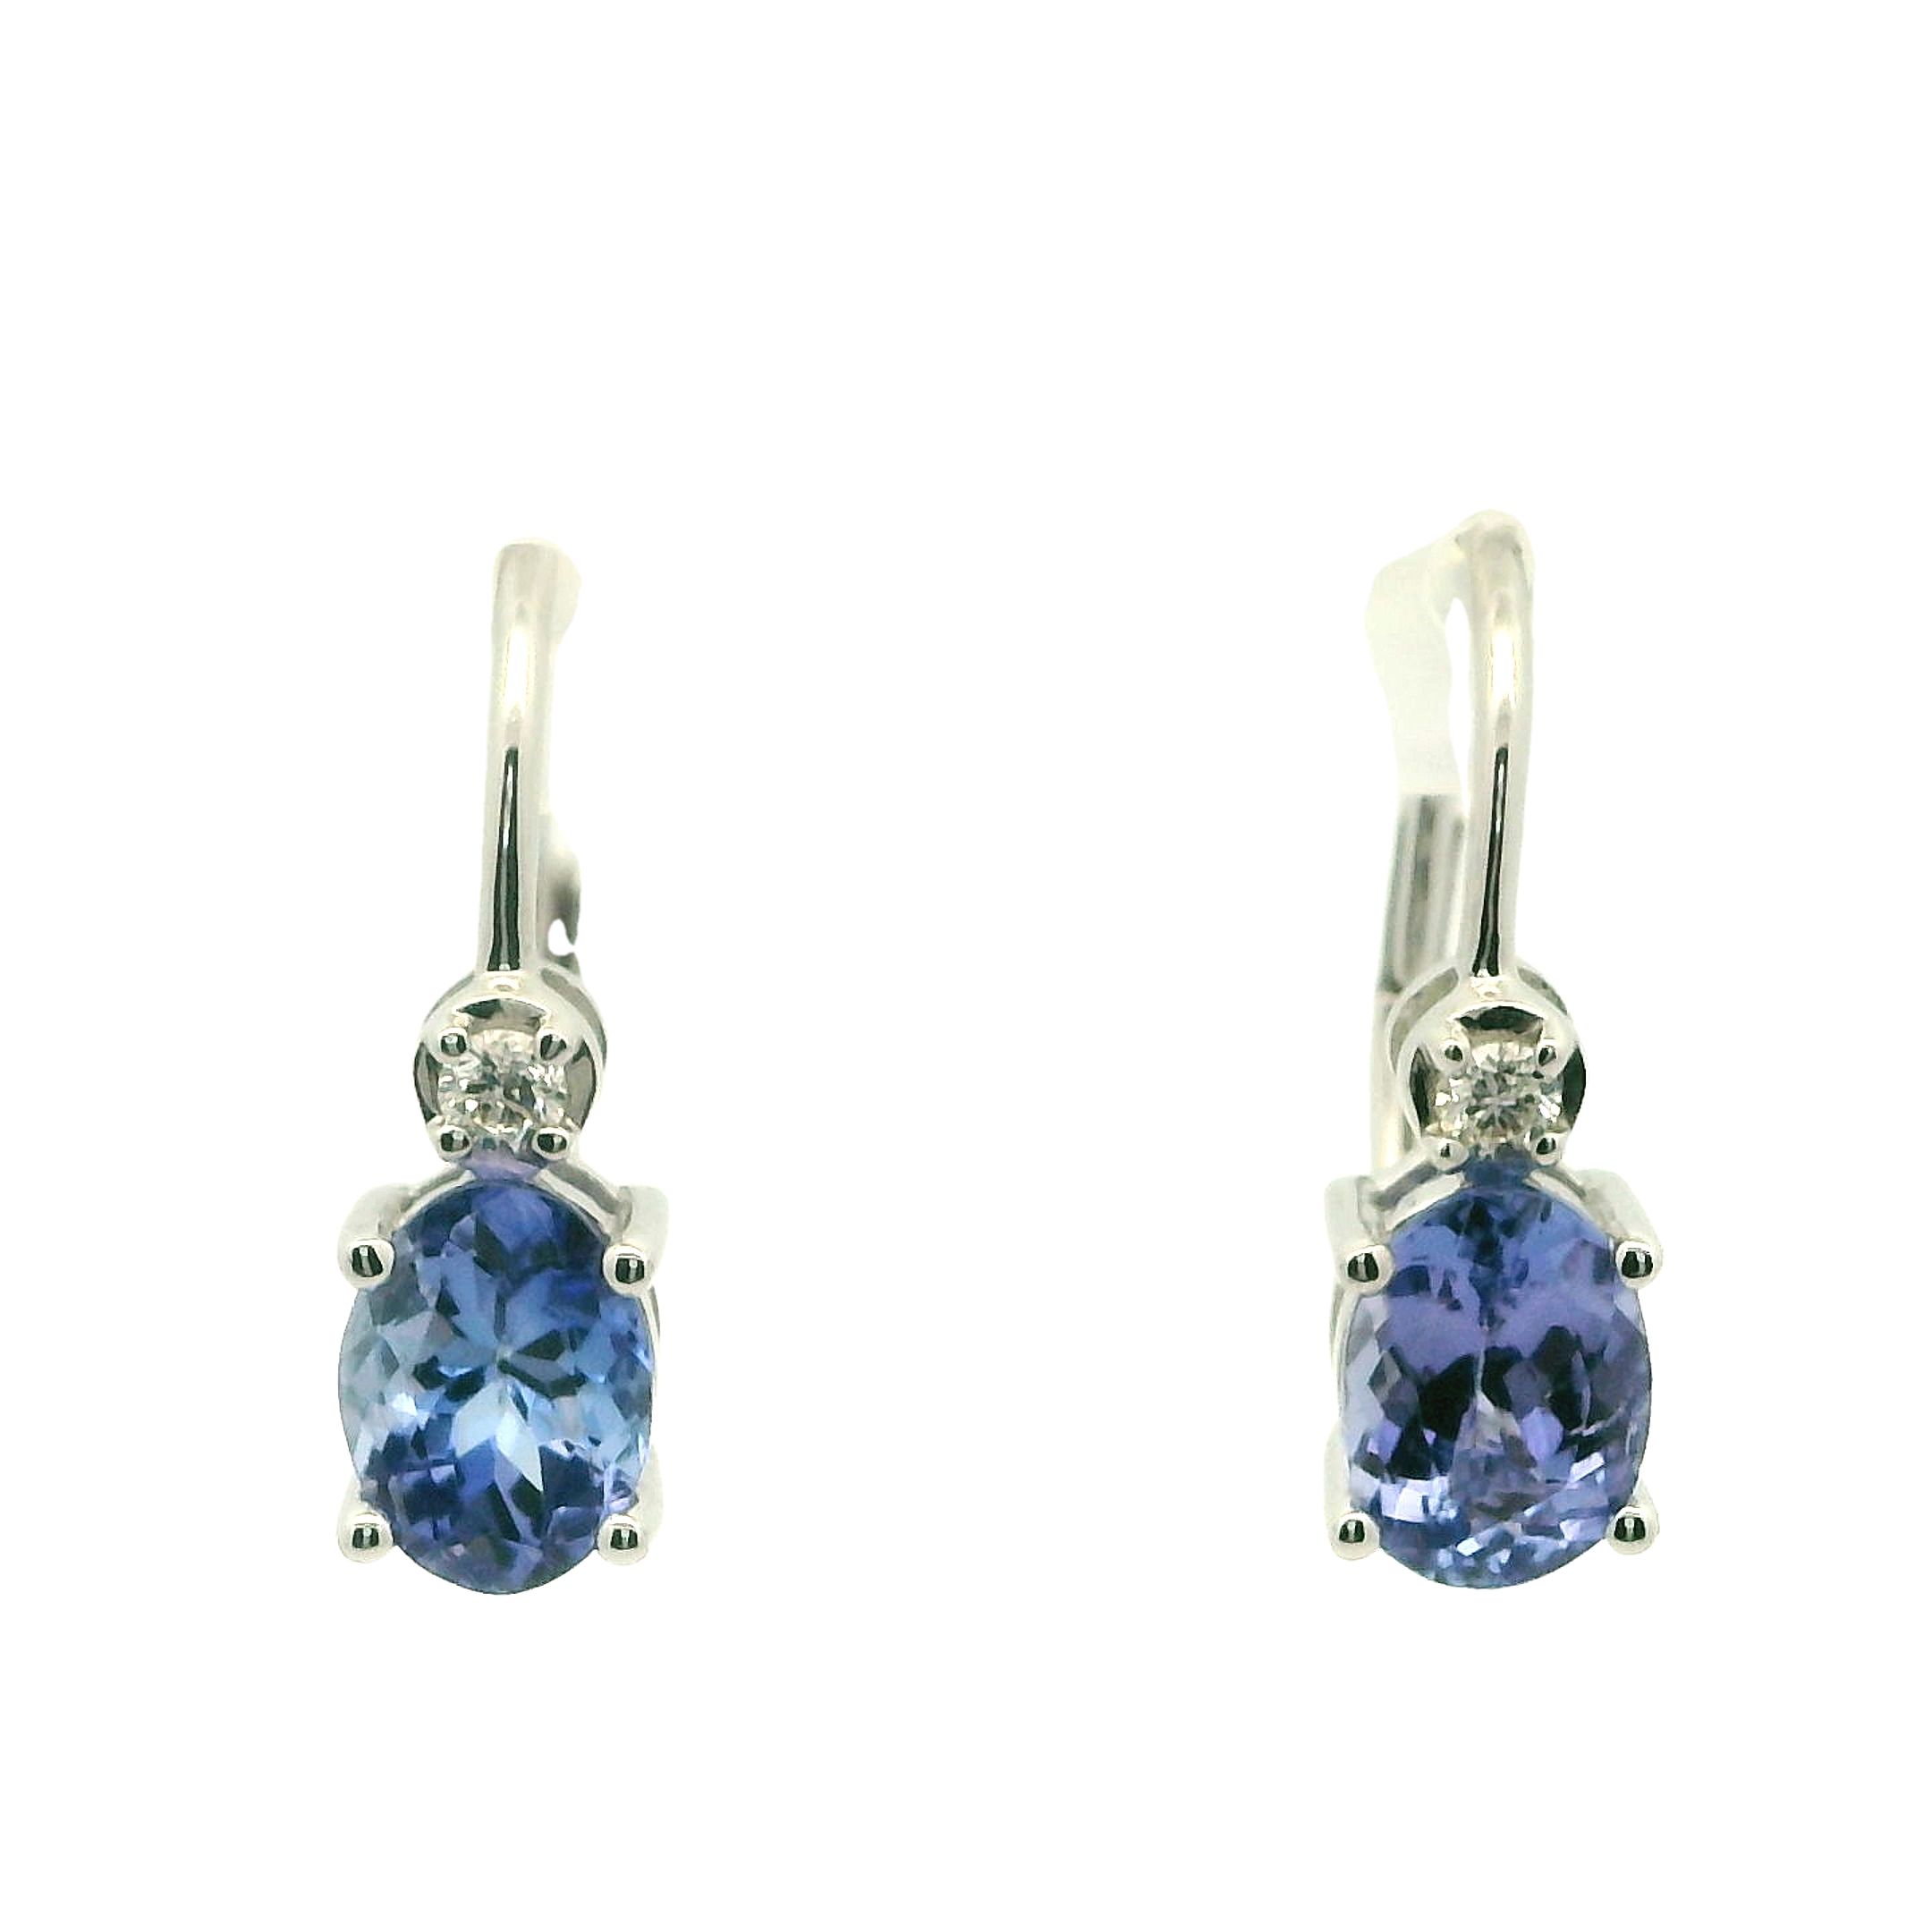 14Kw 1.99Cttw Oval Tanzanite Lever Back Earrings W/Diamond Accent